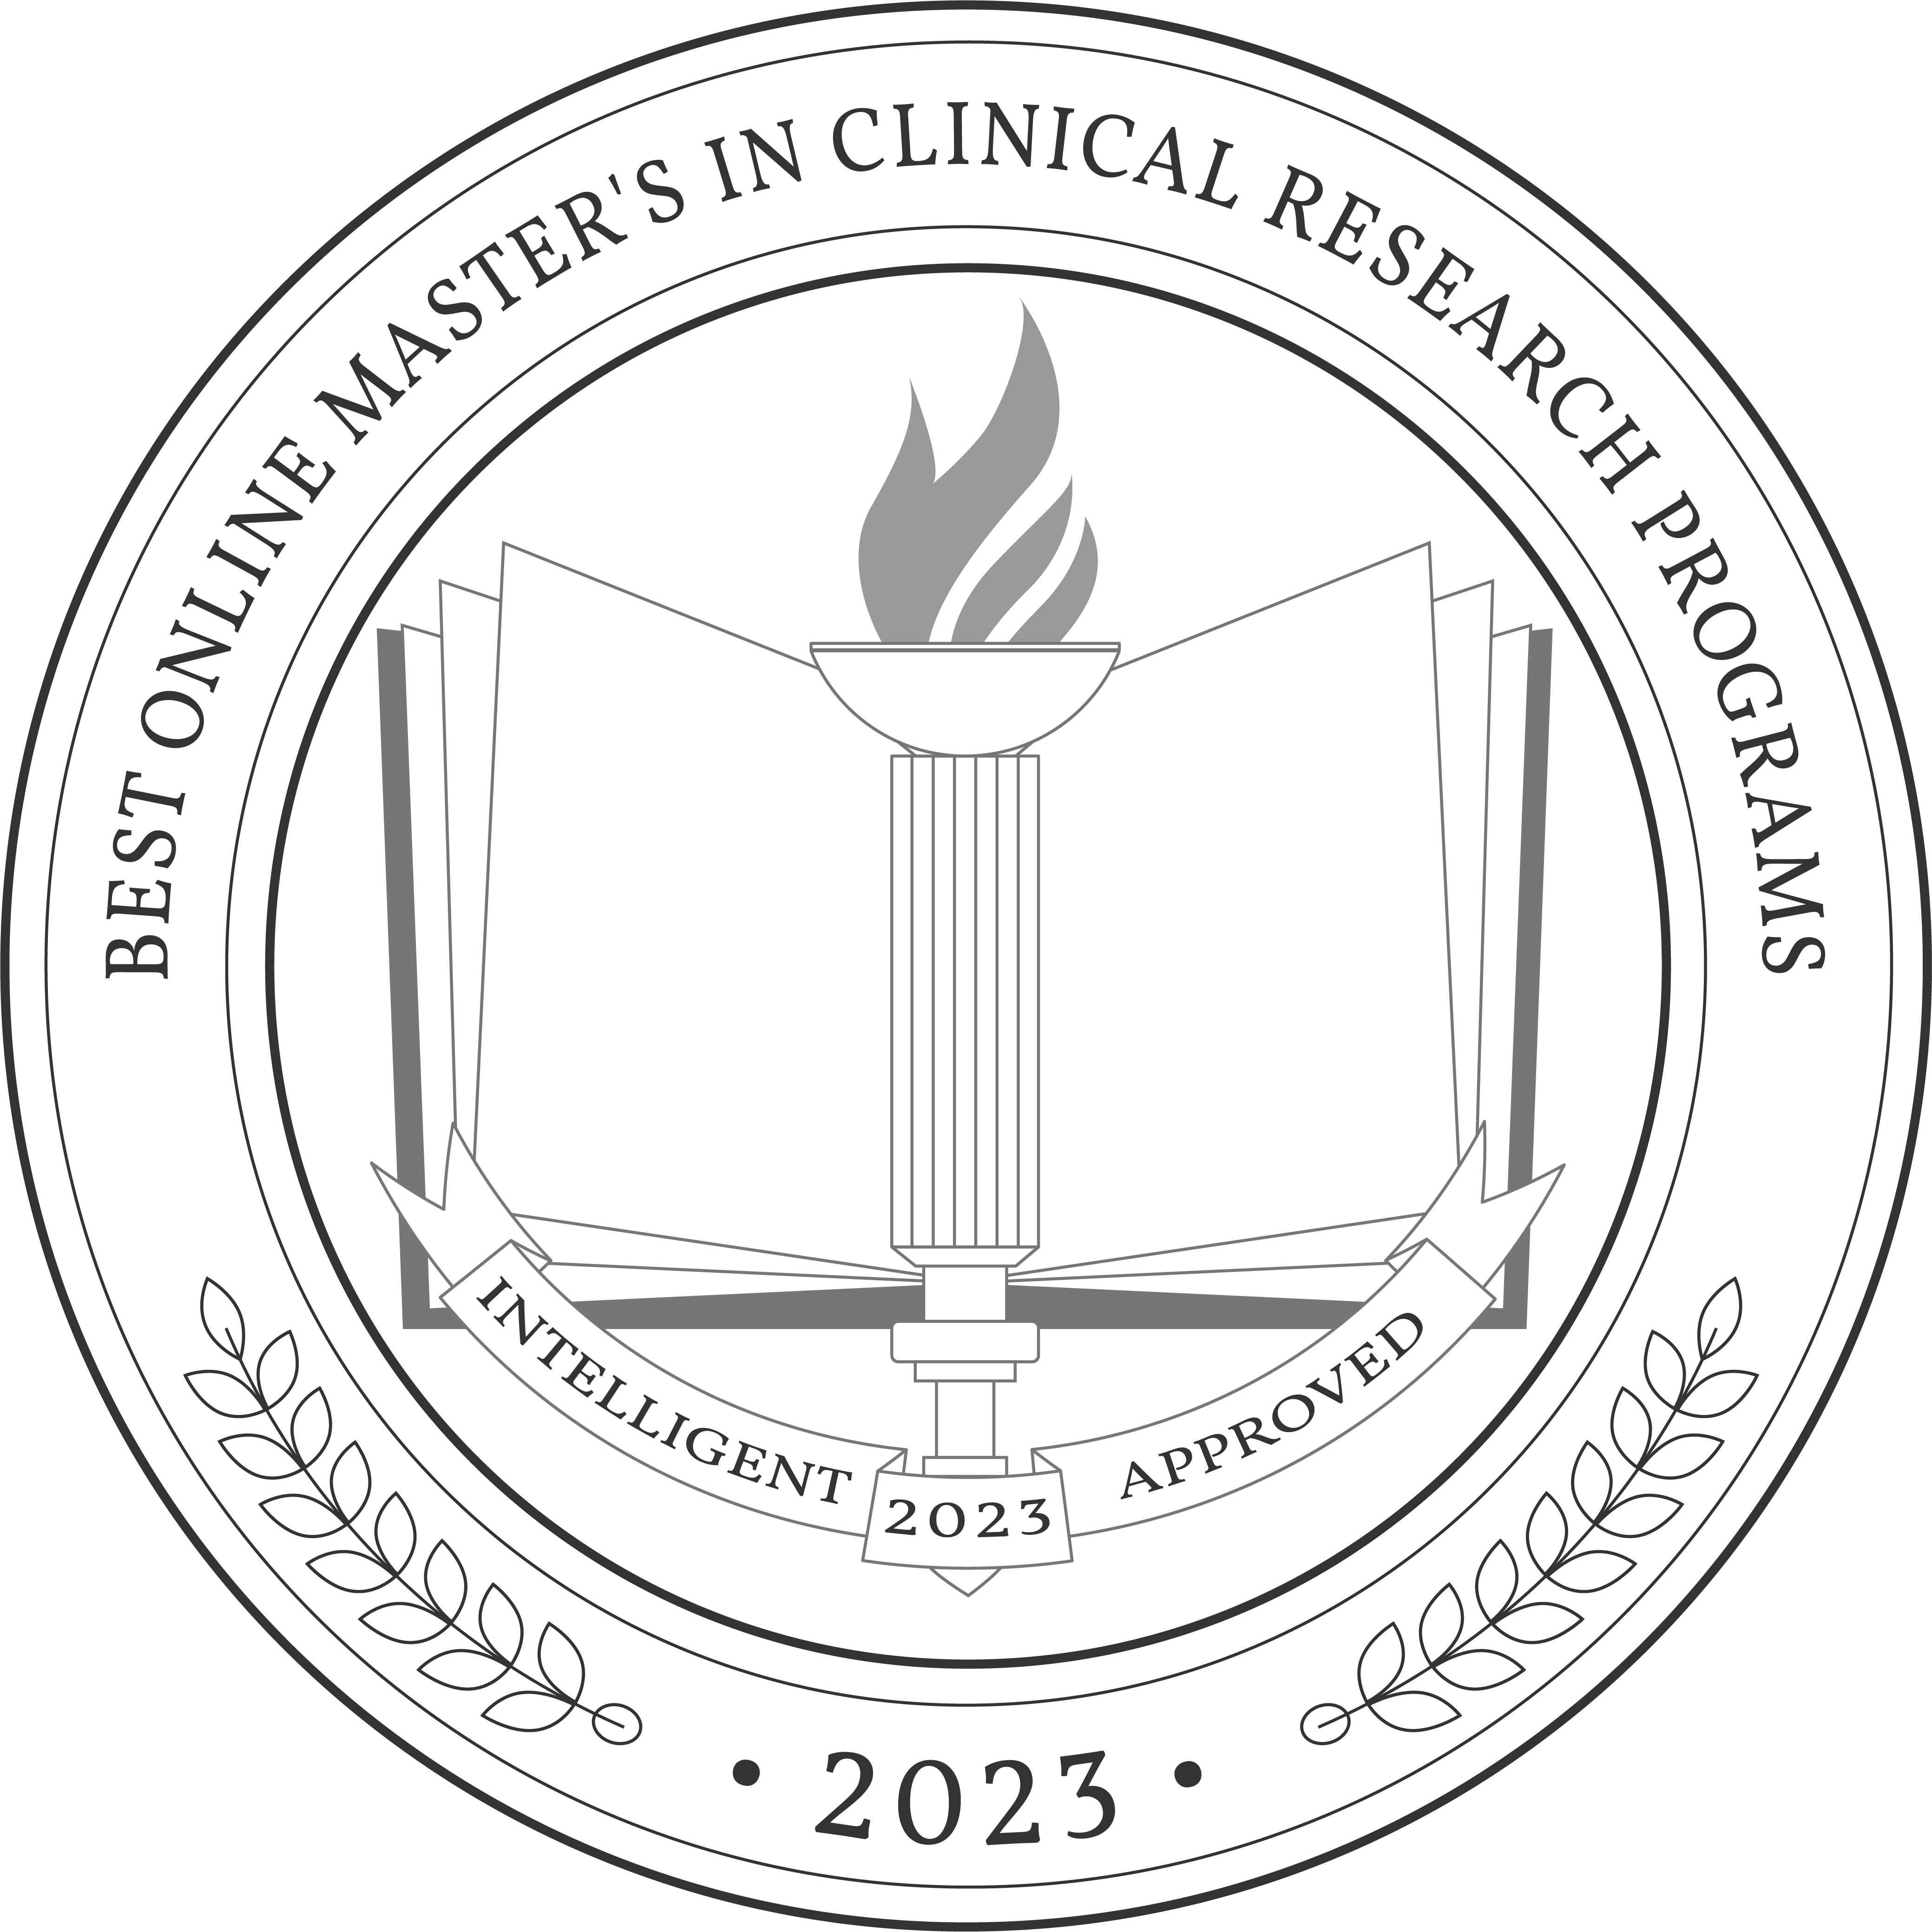 Best Online Master's in Clinical Research Programs badge